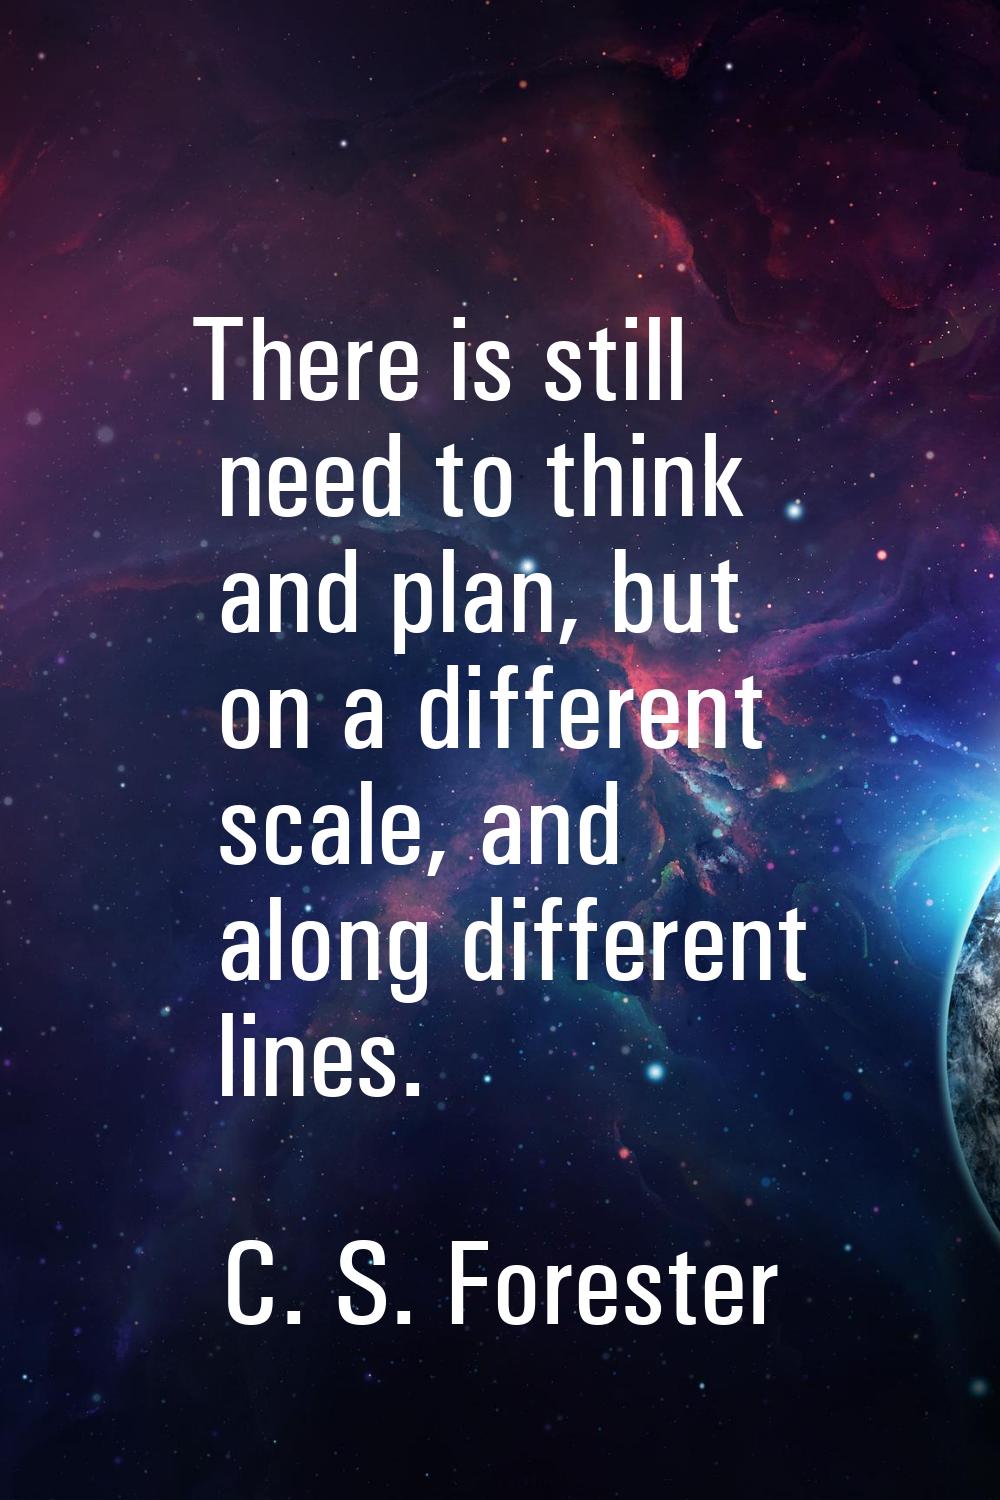 There is still need to think and plan, but on a different scale, and along different lines.